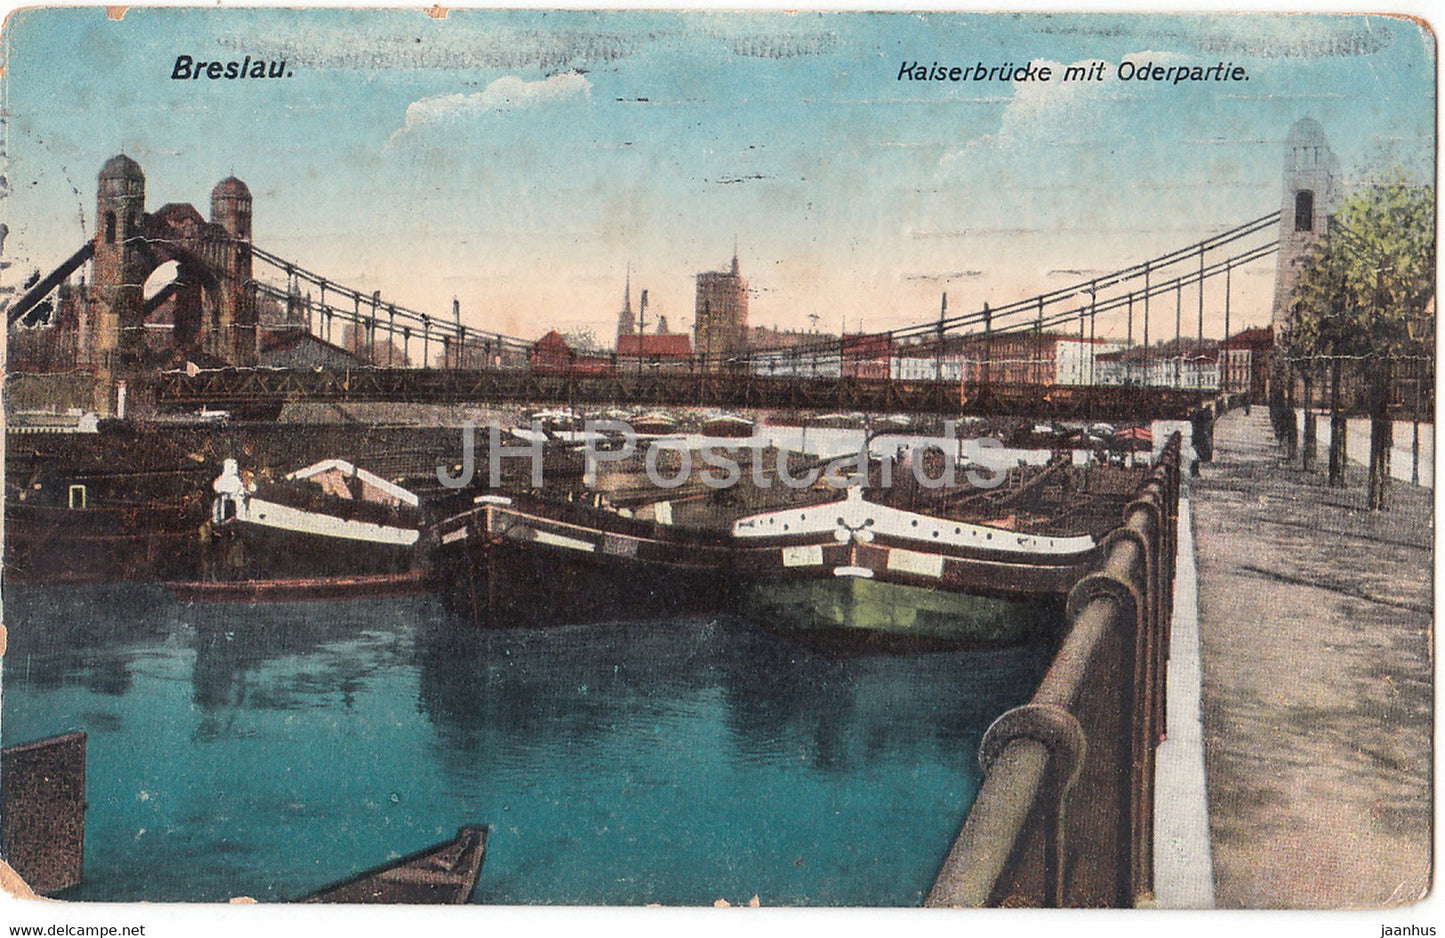 Breslau - Wroclaw - Kaiserbrucke mit Oderpartie - ship - boat - 6 - old postcard - 1917 - Poland - used - JH Postcards